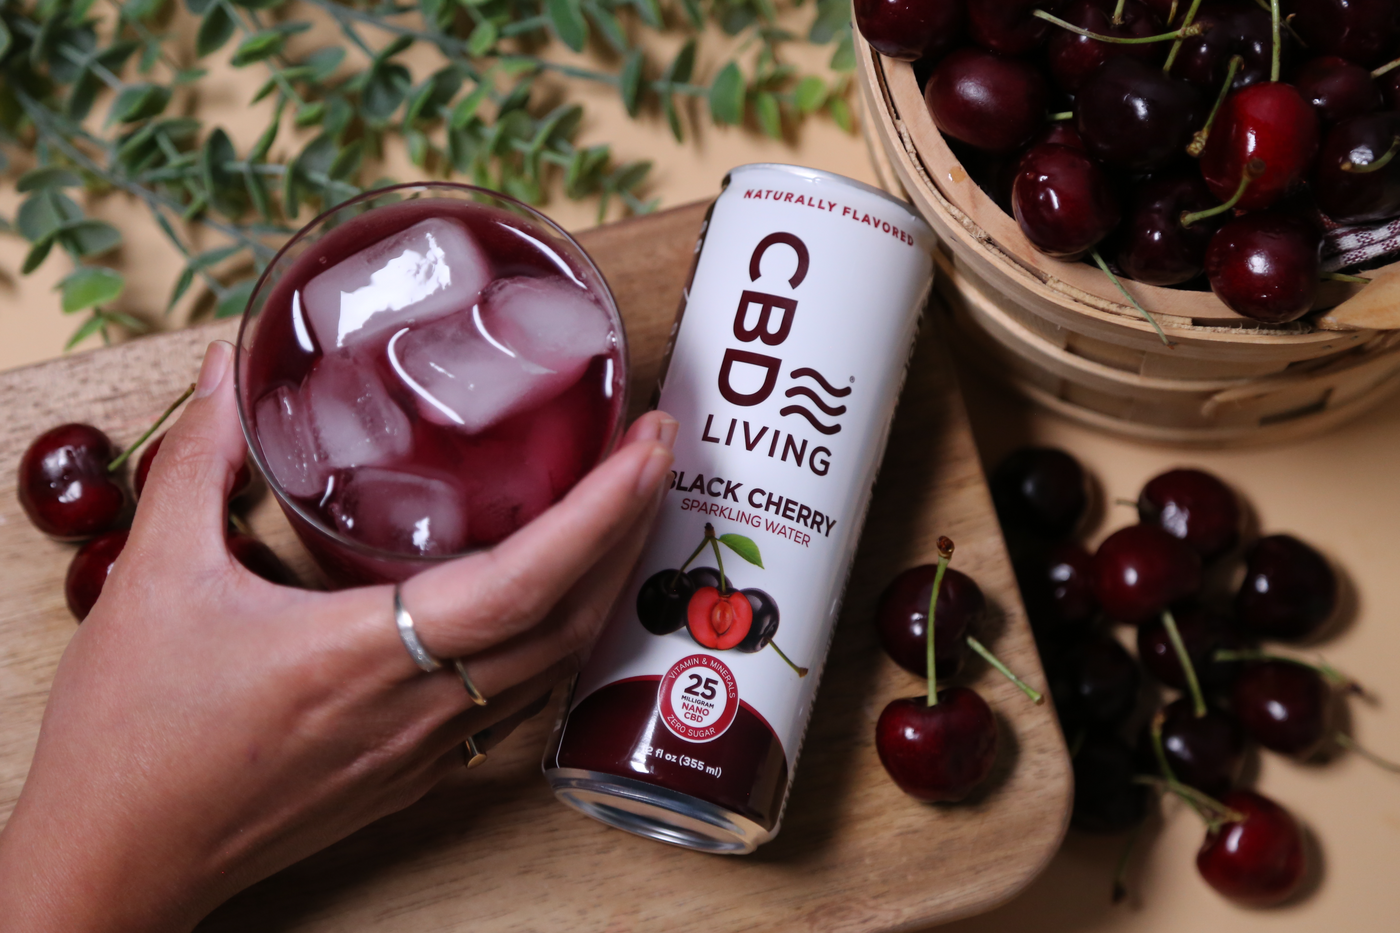 The New Way to chill: CBD infused sparkling water